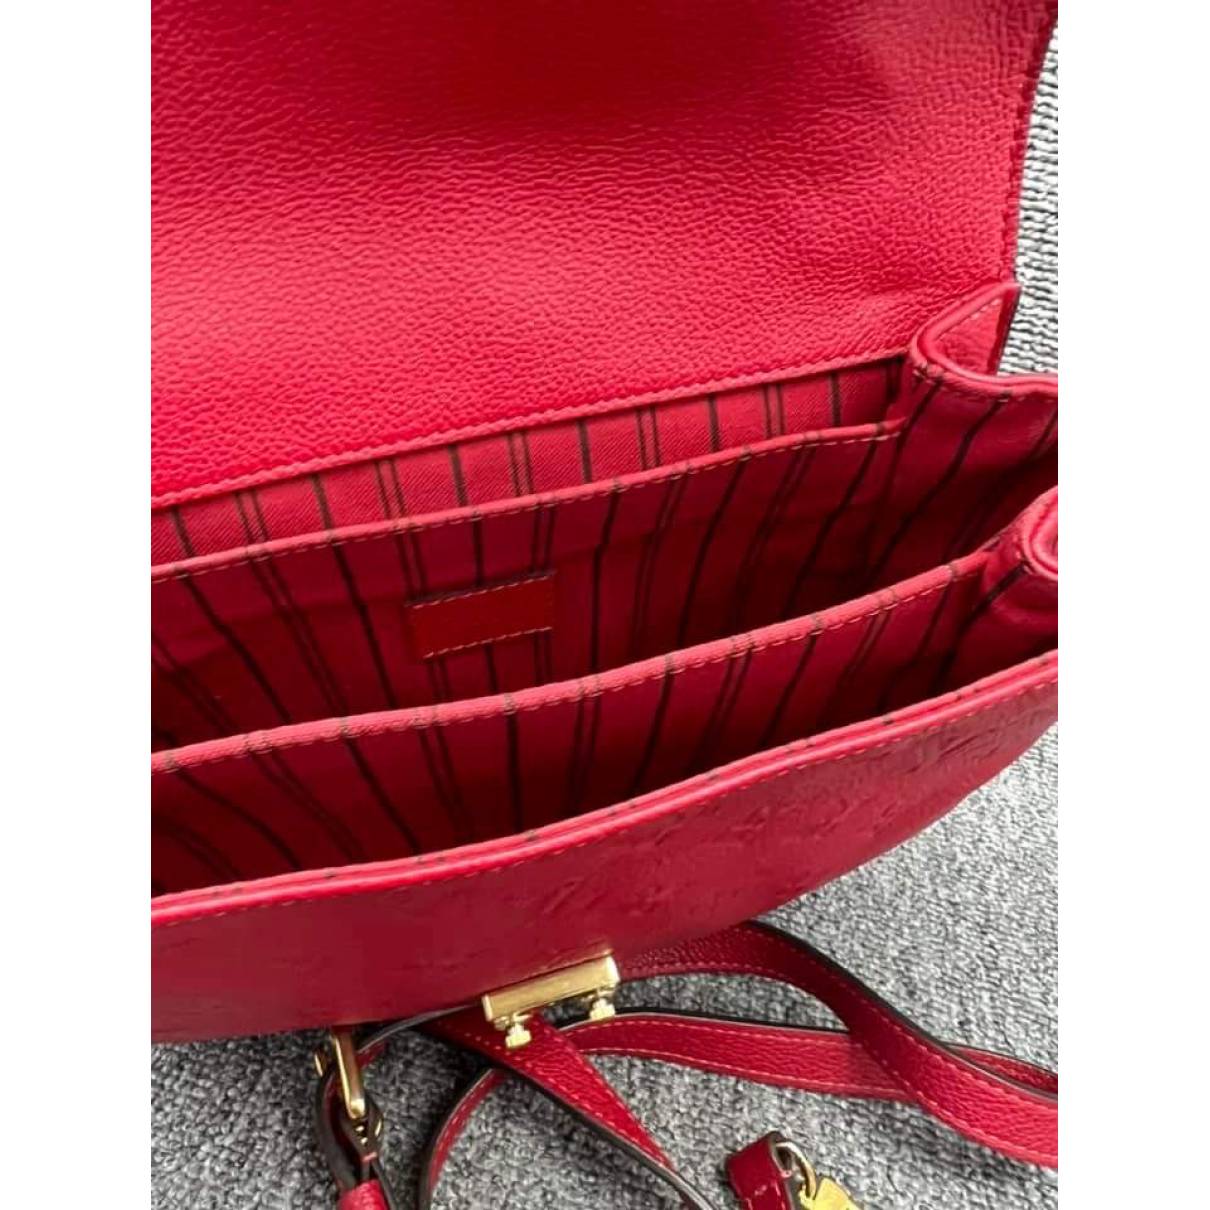 black louis vuitton purse with red inside